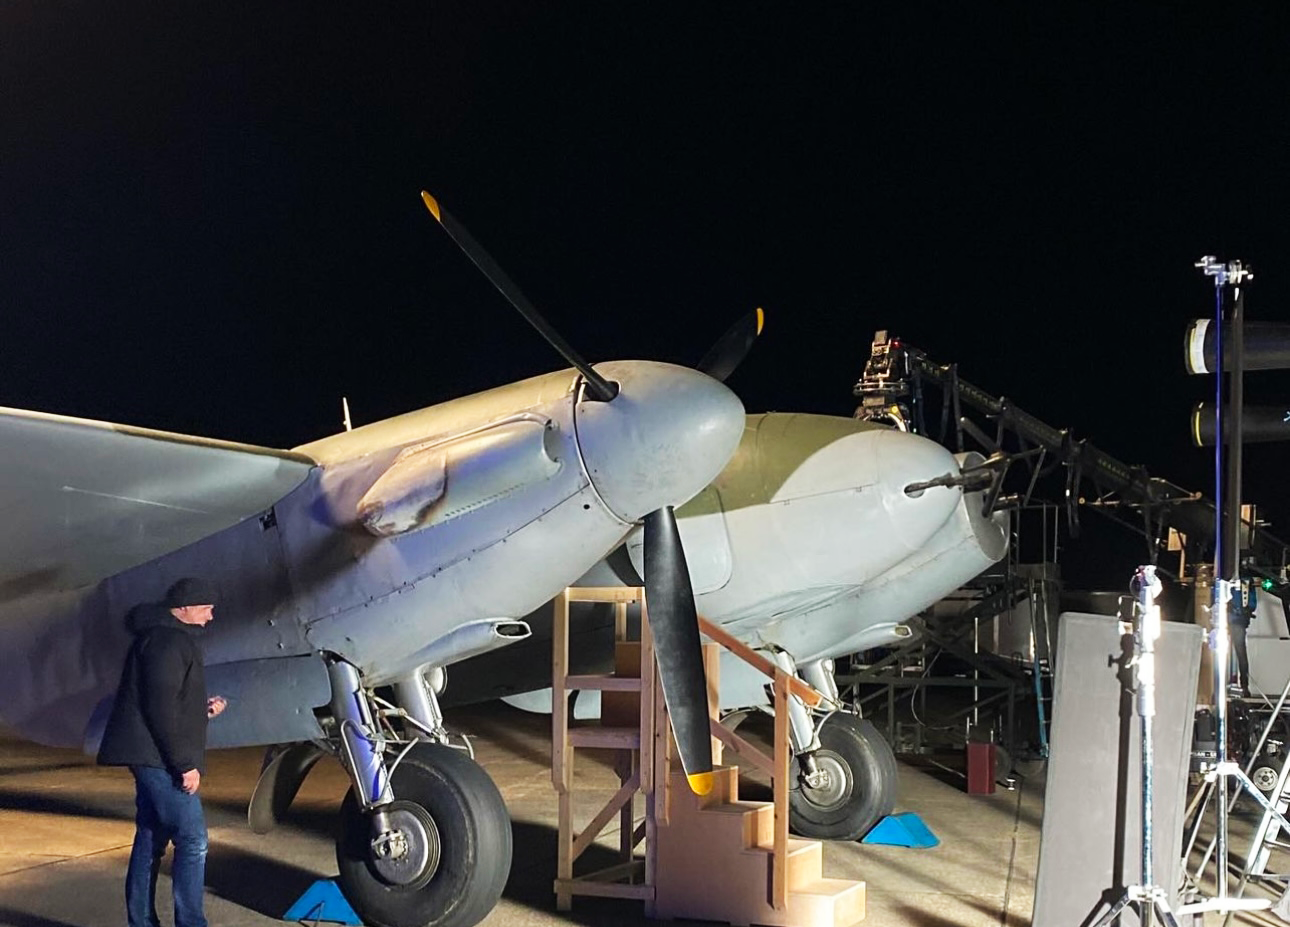 Behind the scenes on set of The Shepherd. WW2 military aircraft.